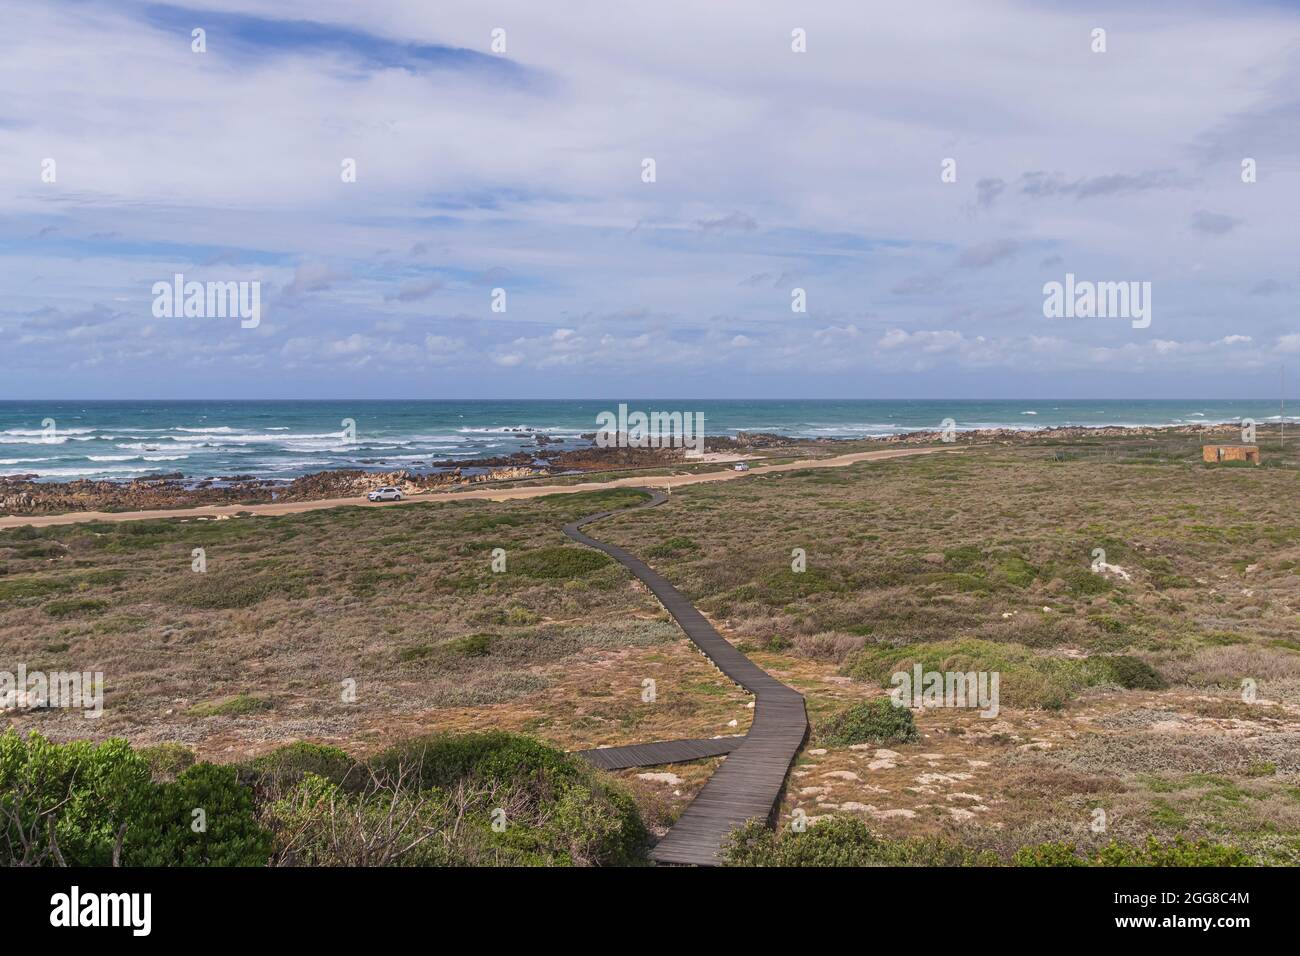 The view of coastal plain with walking plank at Cape Agulhas National Park which is the Africa continent southernmost point in South Africa. Stock Photo